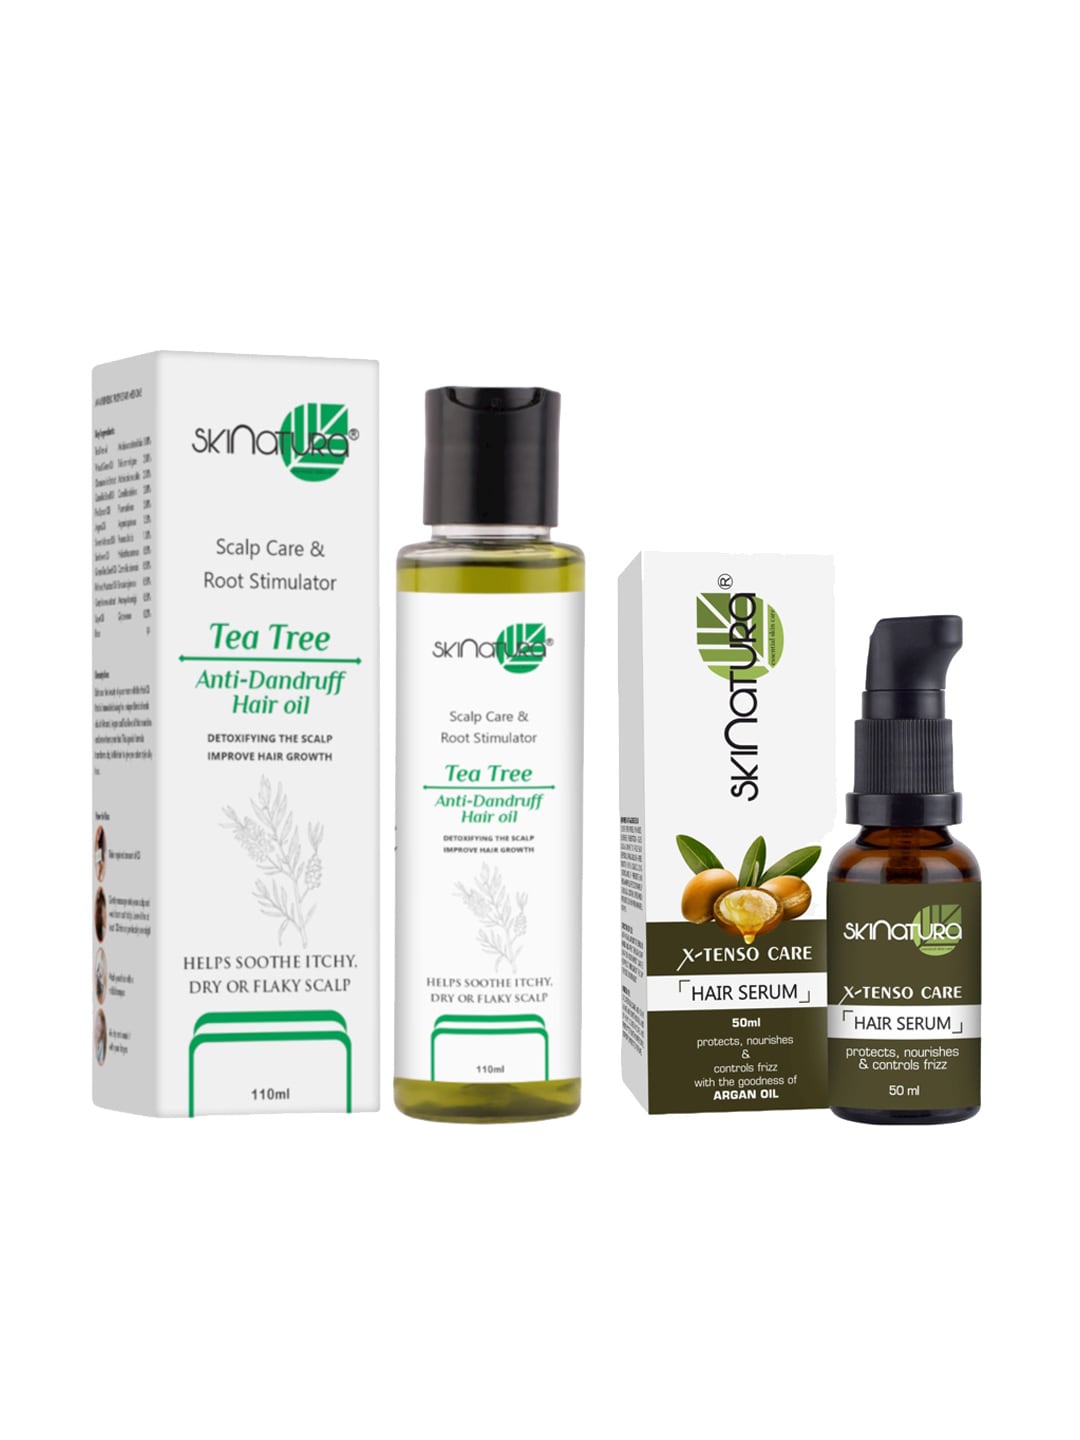 Skinatura Anti-Dandruff Tea Tree Hair Oil & X-TENSO Care Hair Serum Price  in India, Full Specifications & Offers 